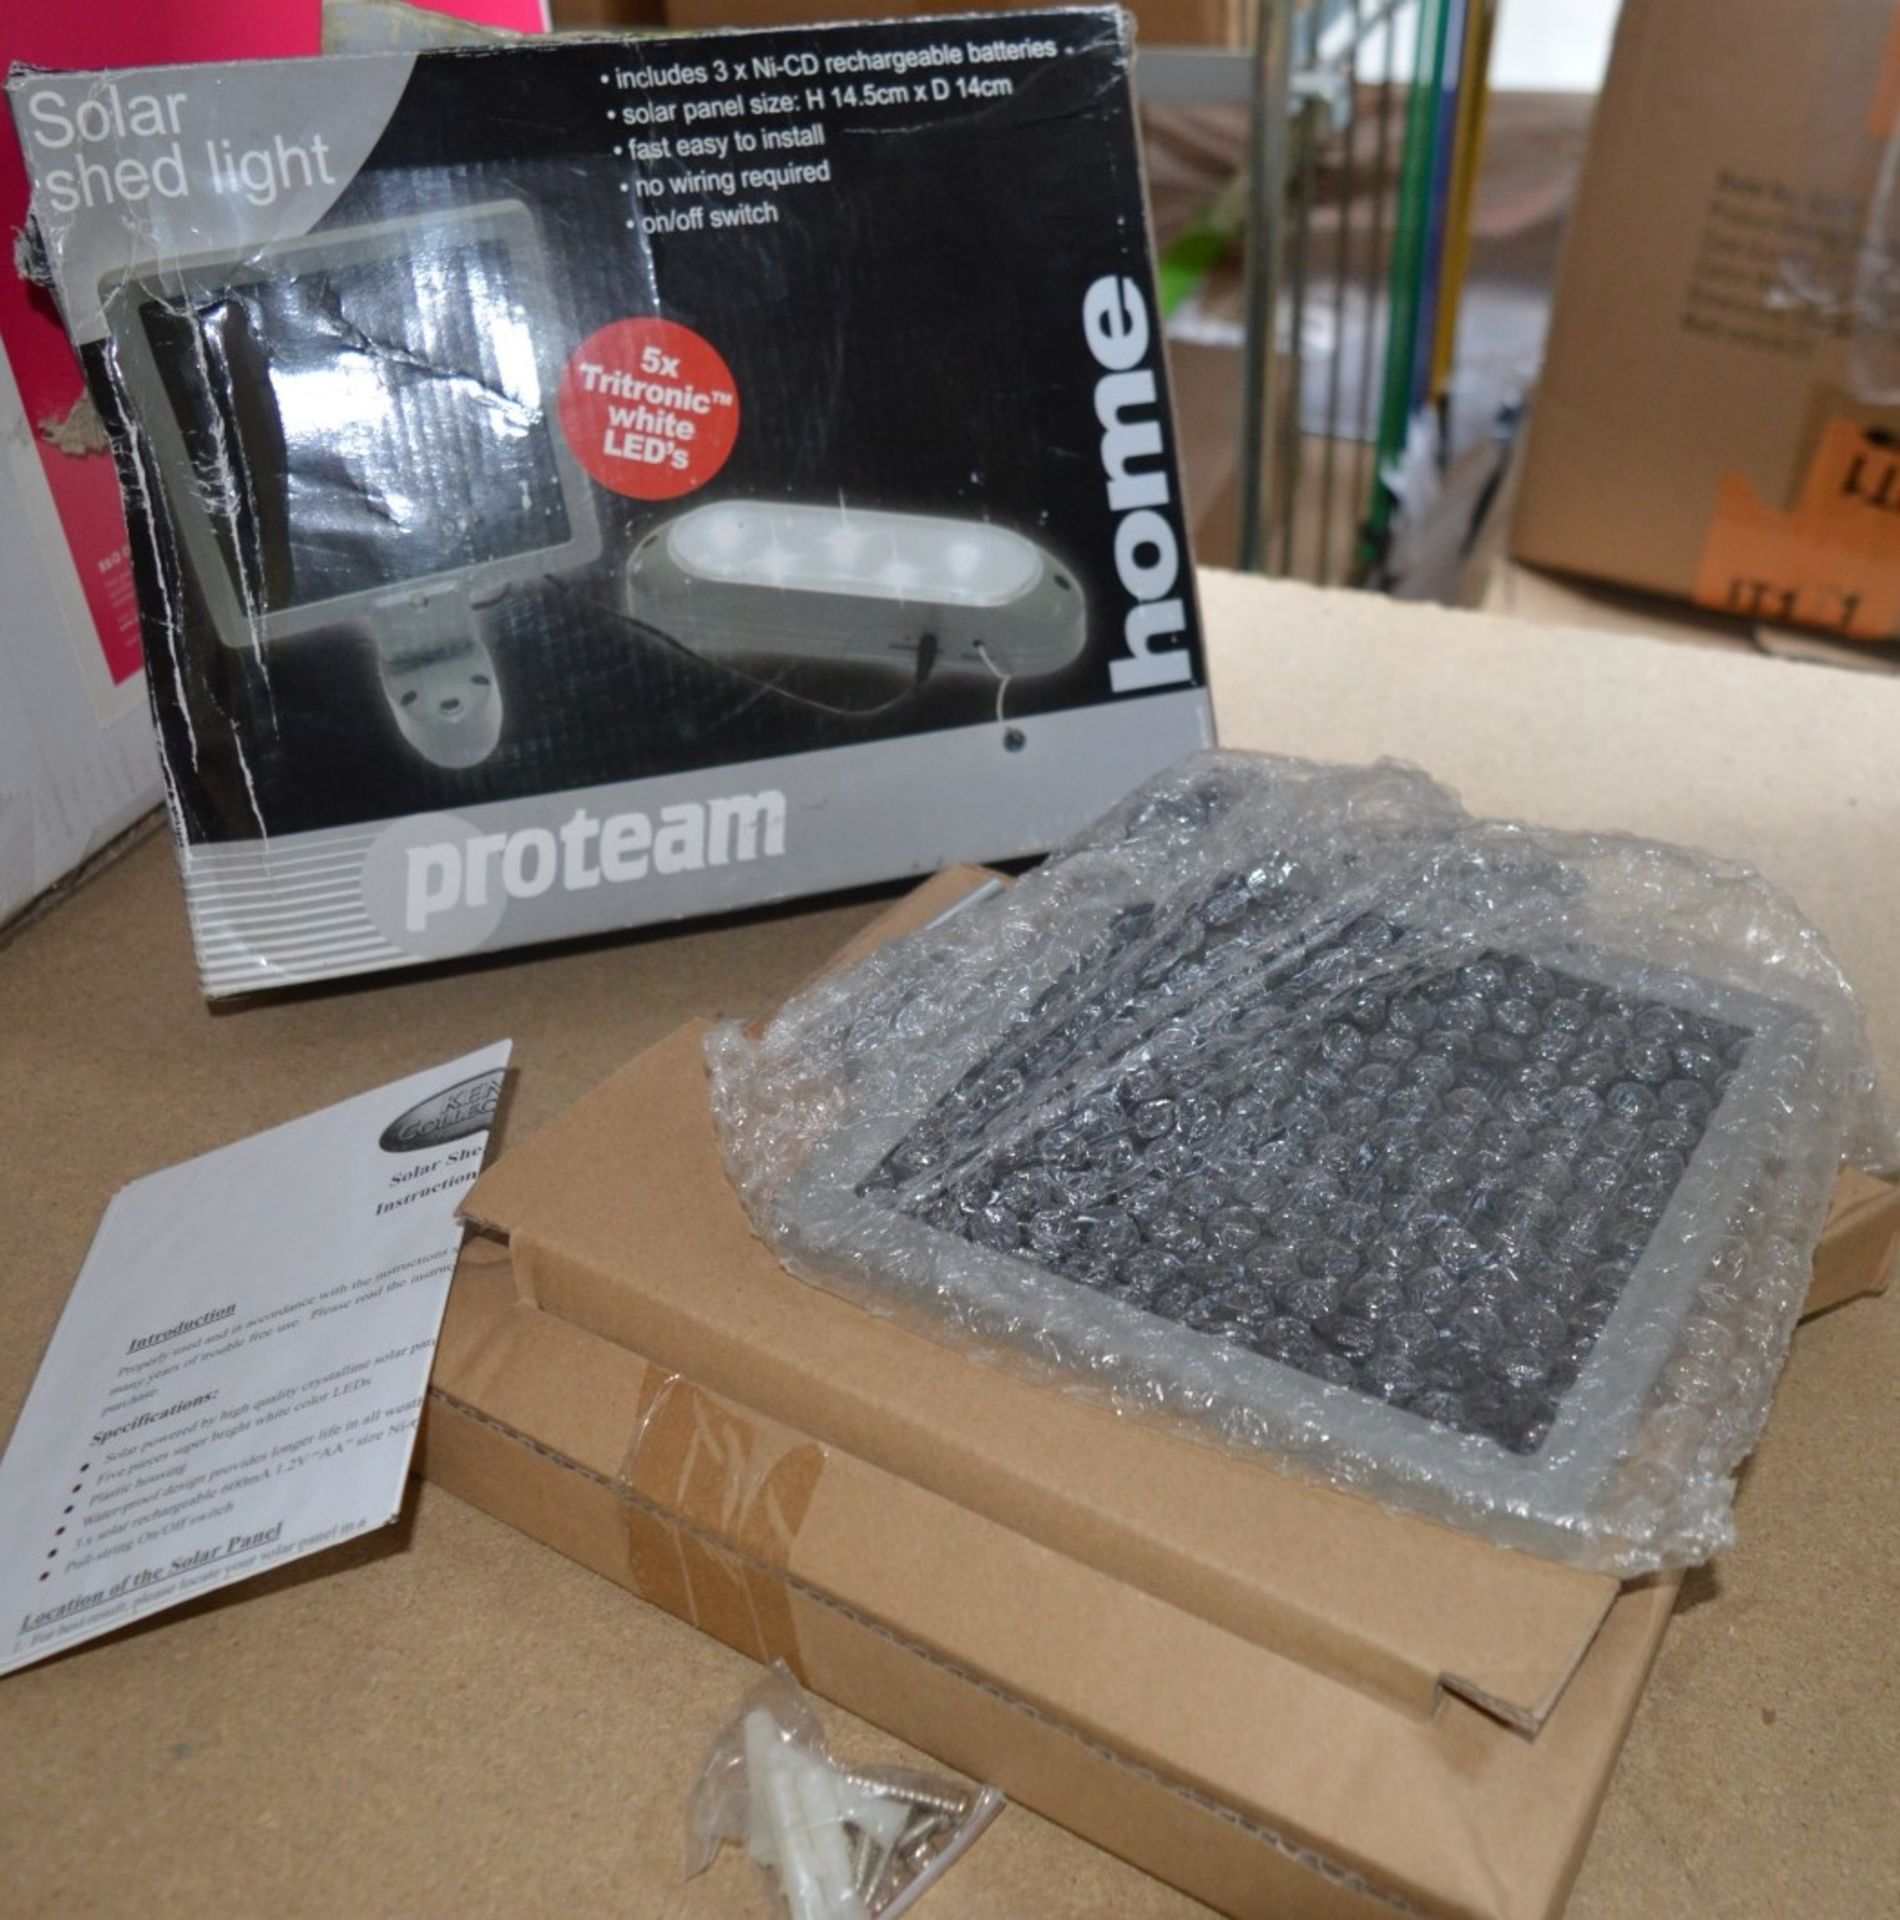 Assorted Collection of Solar Pawered Garden Lights - Includes Proteam Shed Light, Pair of Hanging - Image 10 of 16